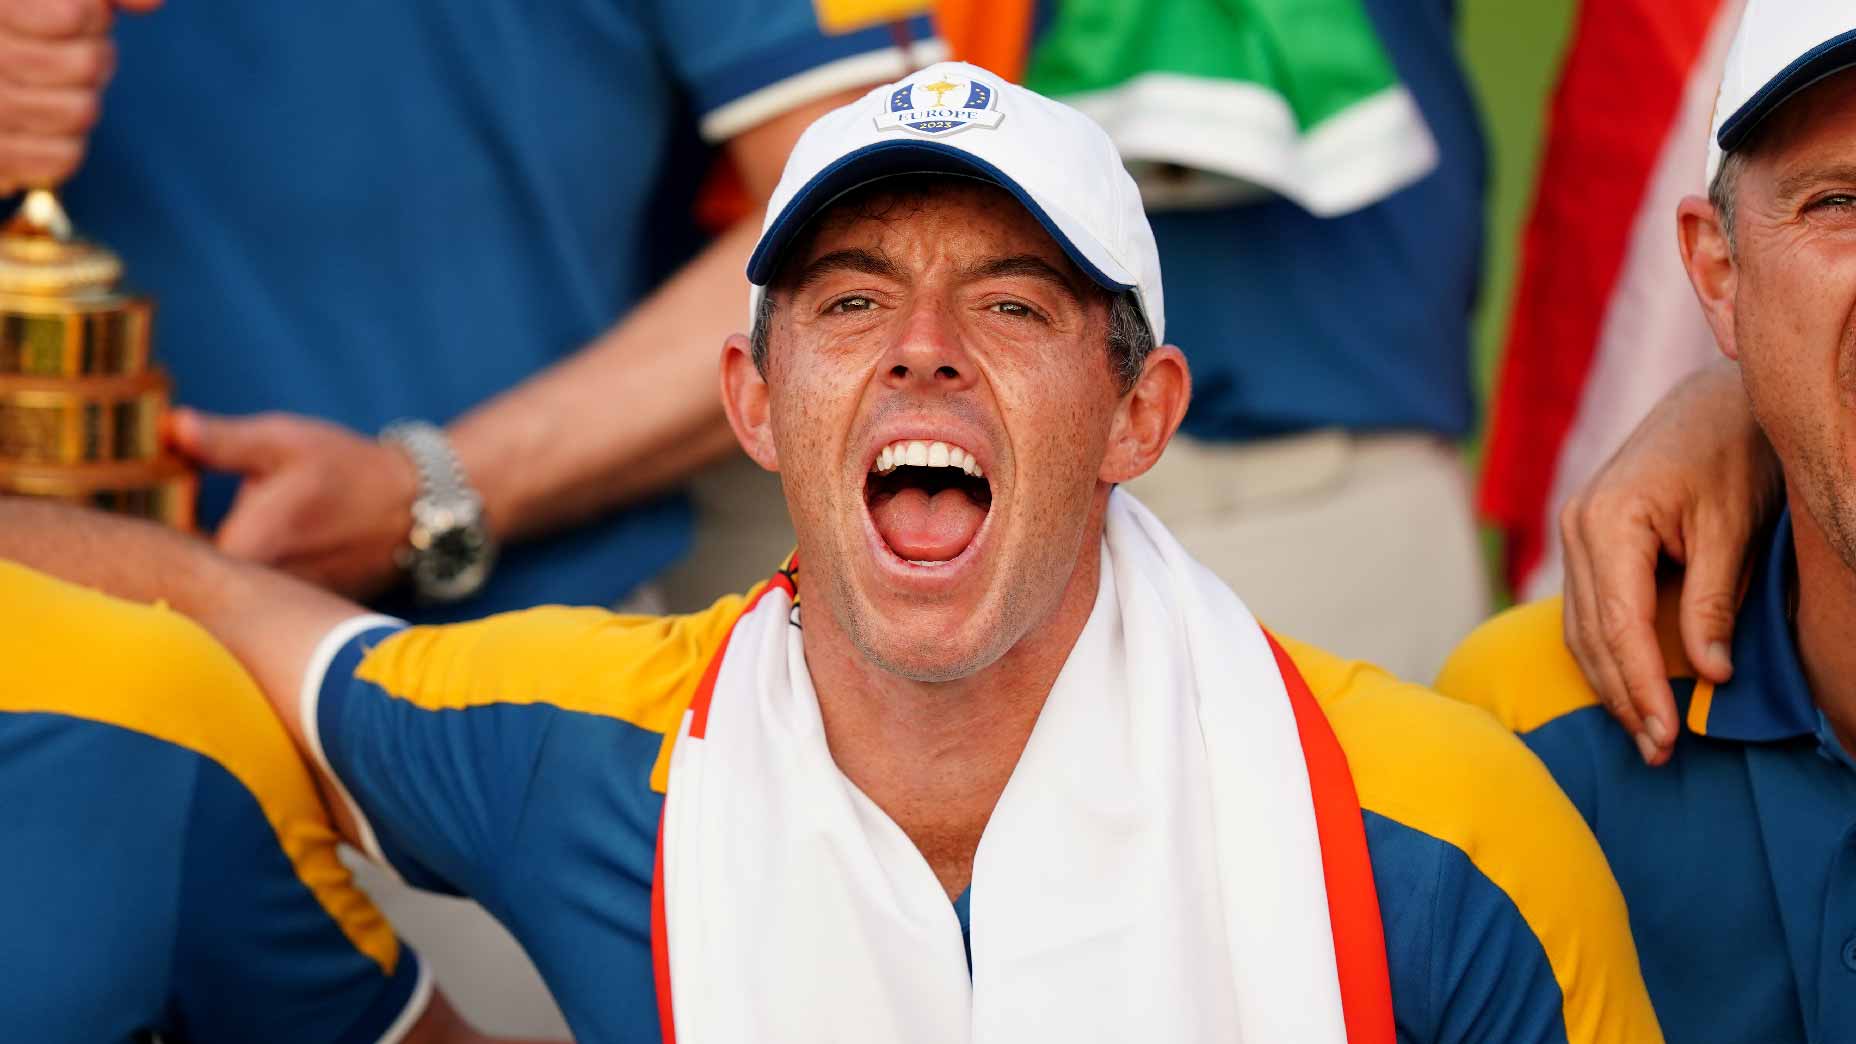 Rory McIlroy Speaks Out About ParkingLot Caddie Spat After Ryder Cup